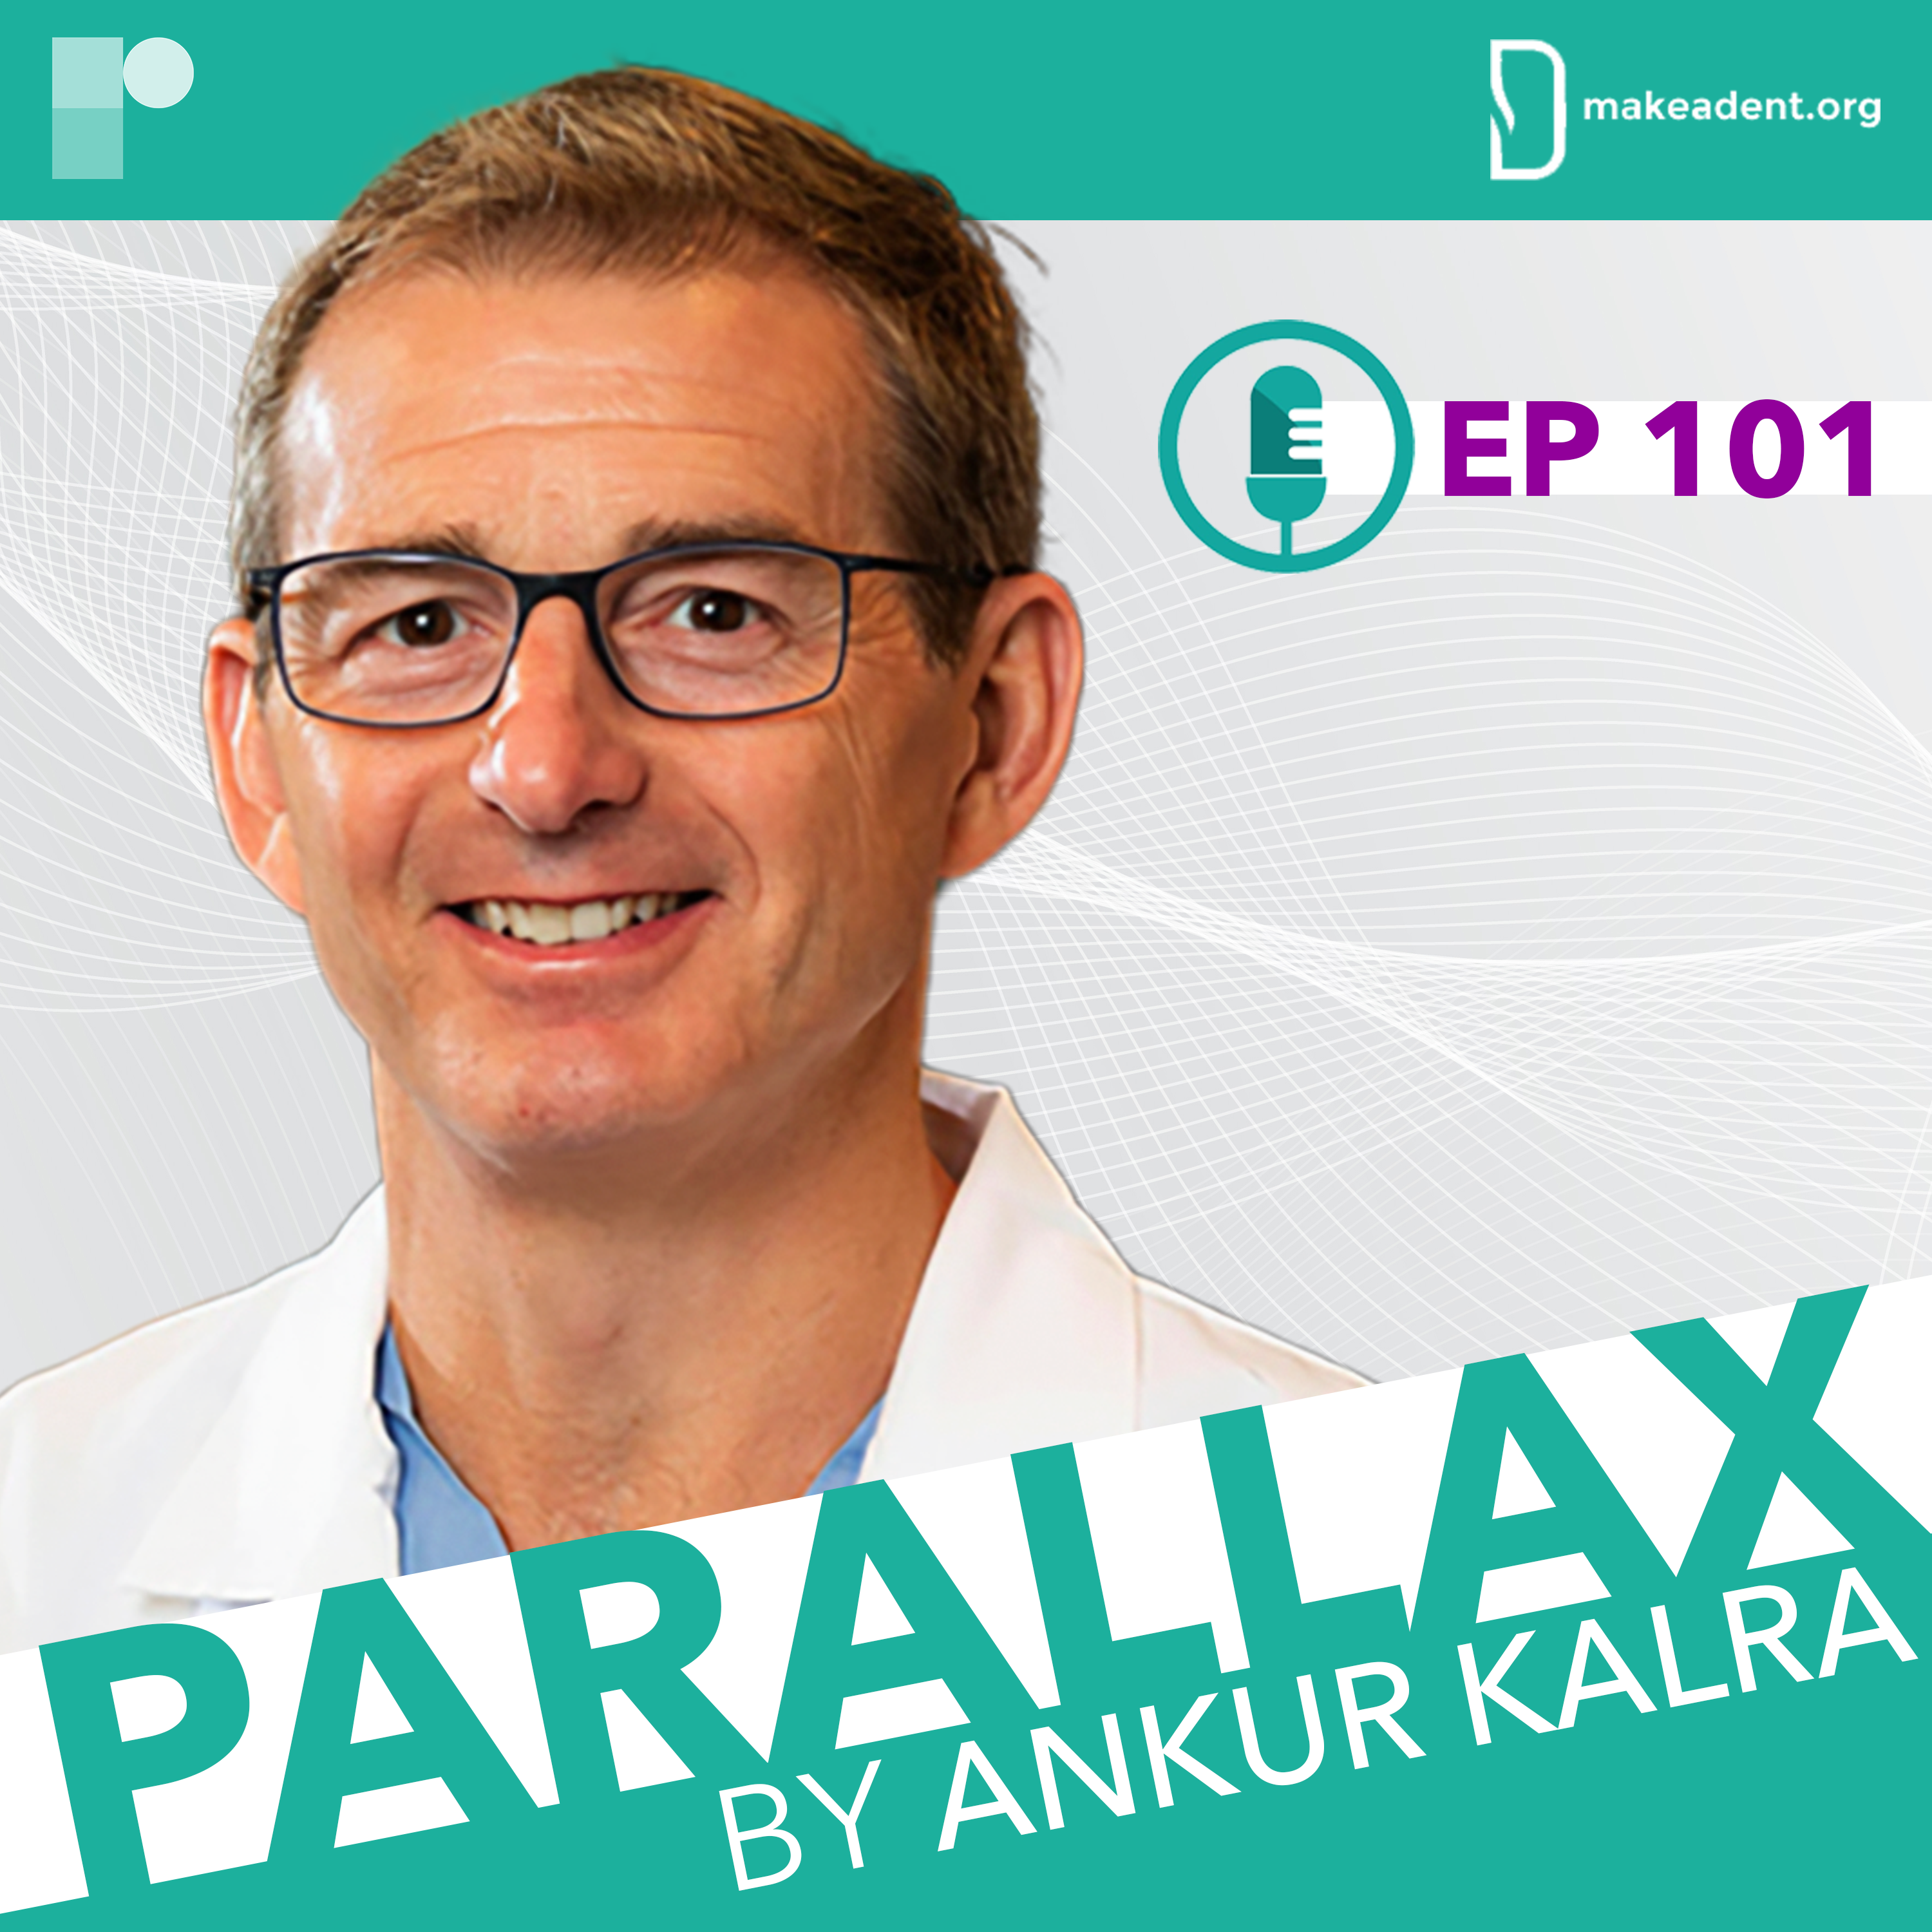 EP 101: Translating Evidence, Innovations & Value for Patients with Dr John Mandrola